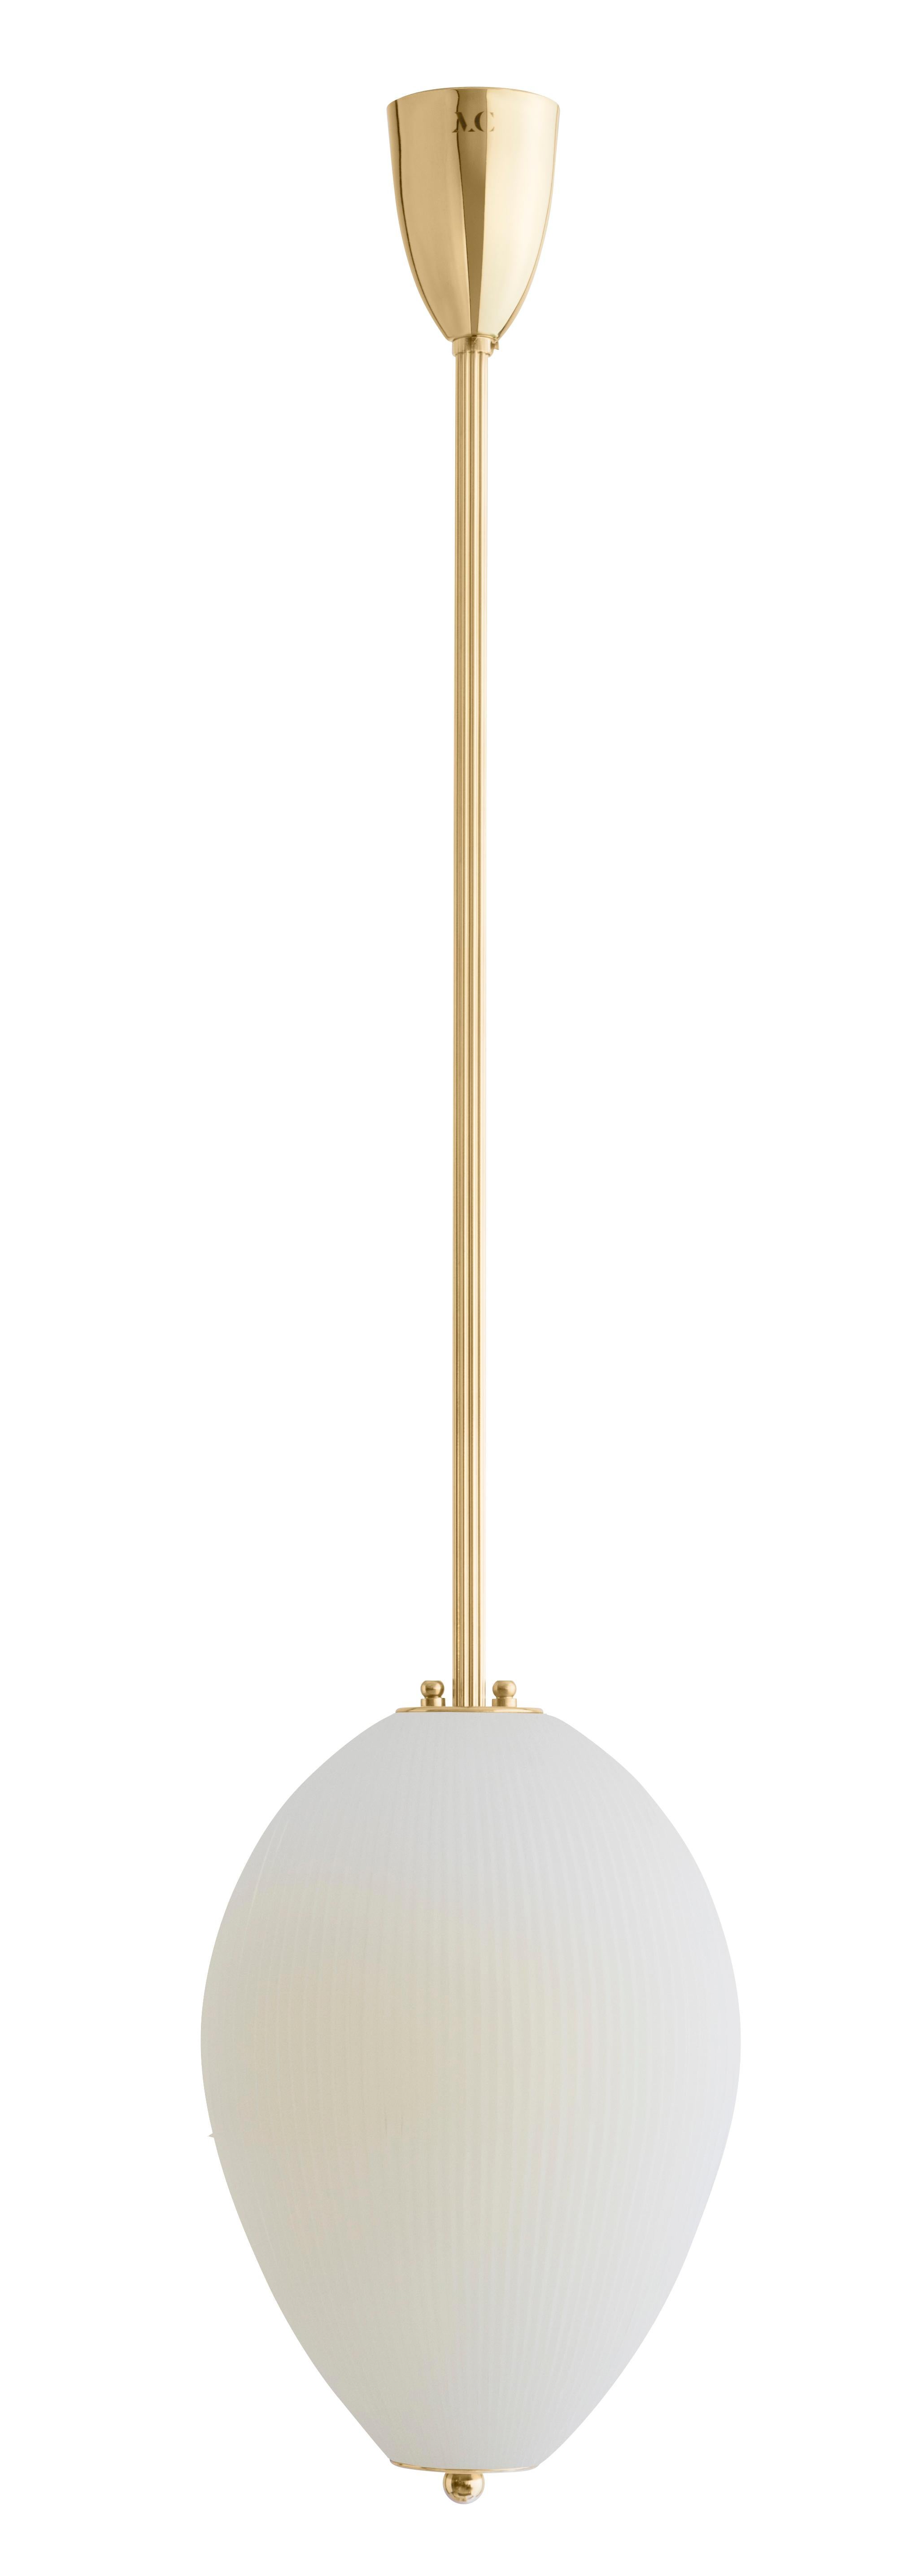 Pendant China 10 by Magic Circus Editions
Dimensions: H 90 x W 32 x D 32 cm, also available in H 110, 130, 150, 175, 190 cm
Materials: Brass, mouth blown glass sculpted with a diamond saw
Colour: ivory

Available finishes: Brass,